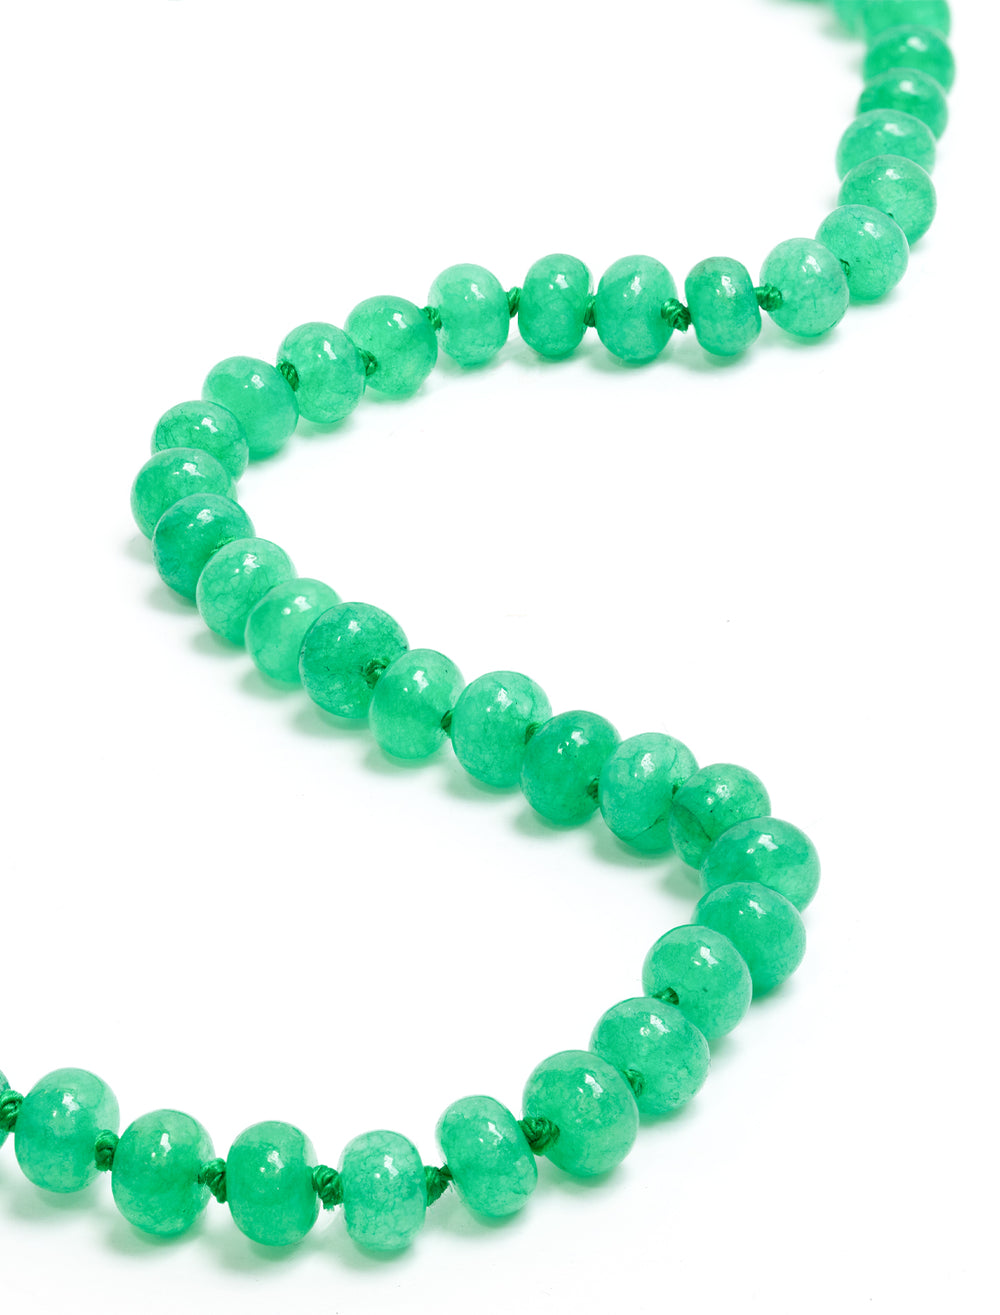 Close-up view of St. Armands' jade candy necklace.